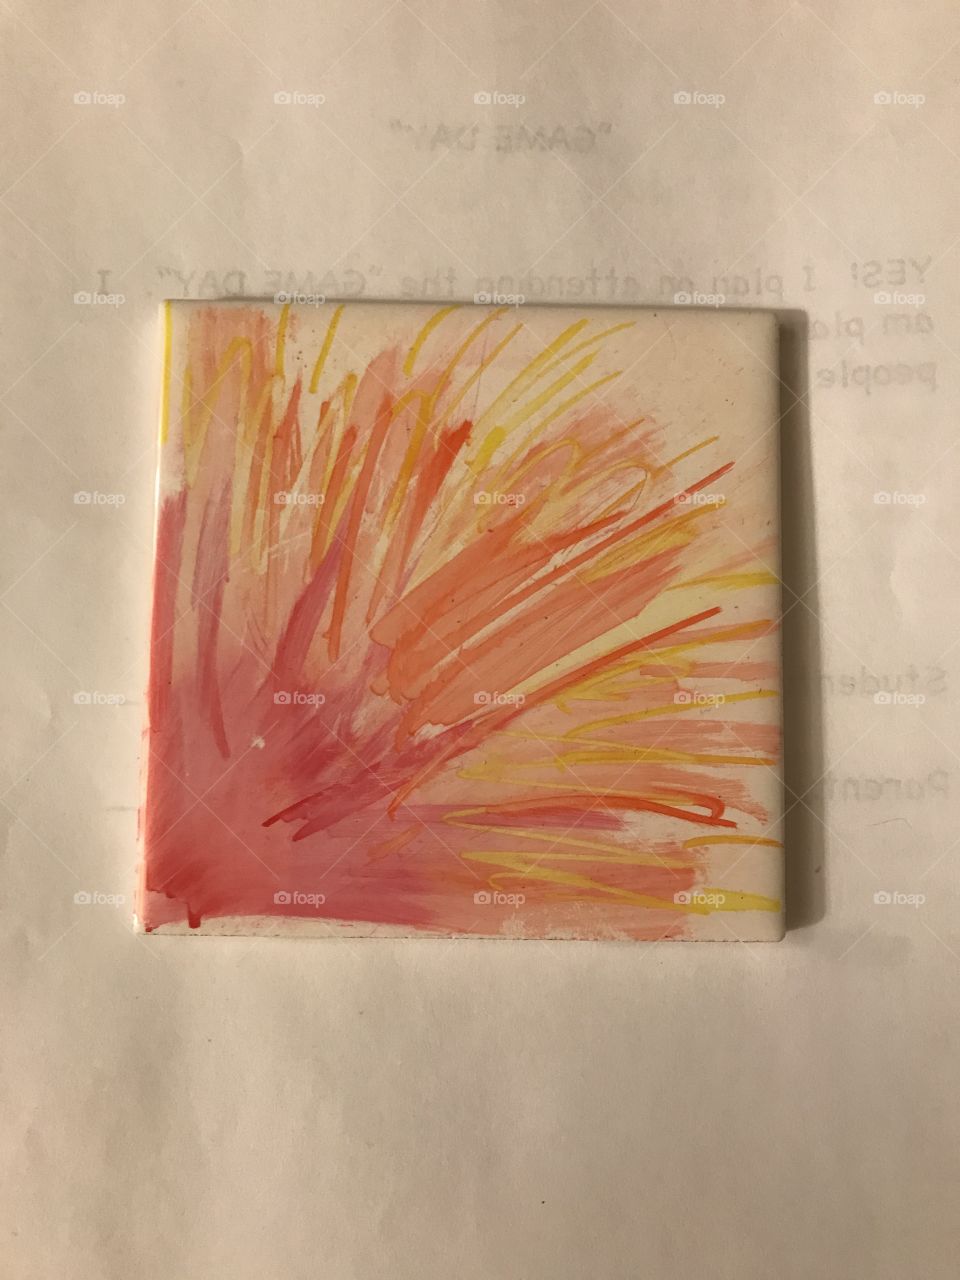 Meant to imitate a watercolor painting or a tie dye item. The color burst represents a fun, energetic, piece that expresses emotions. 